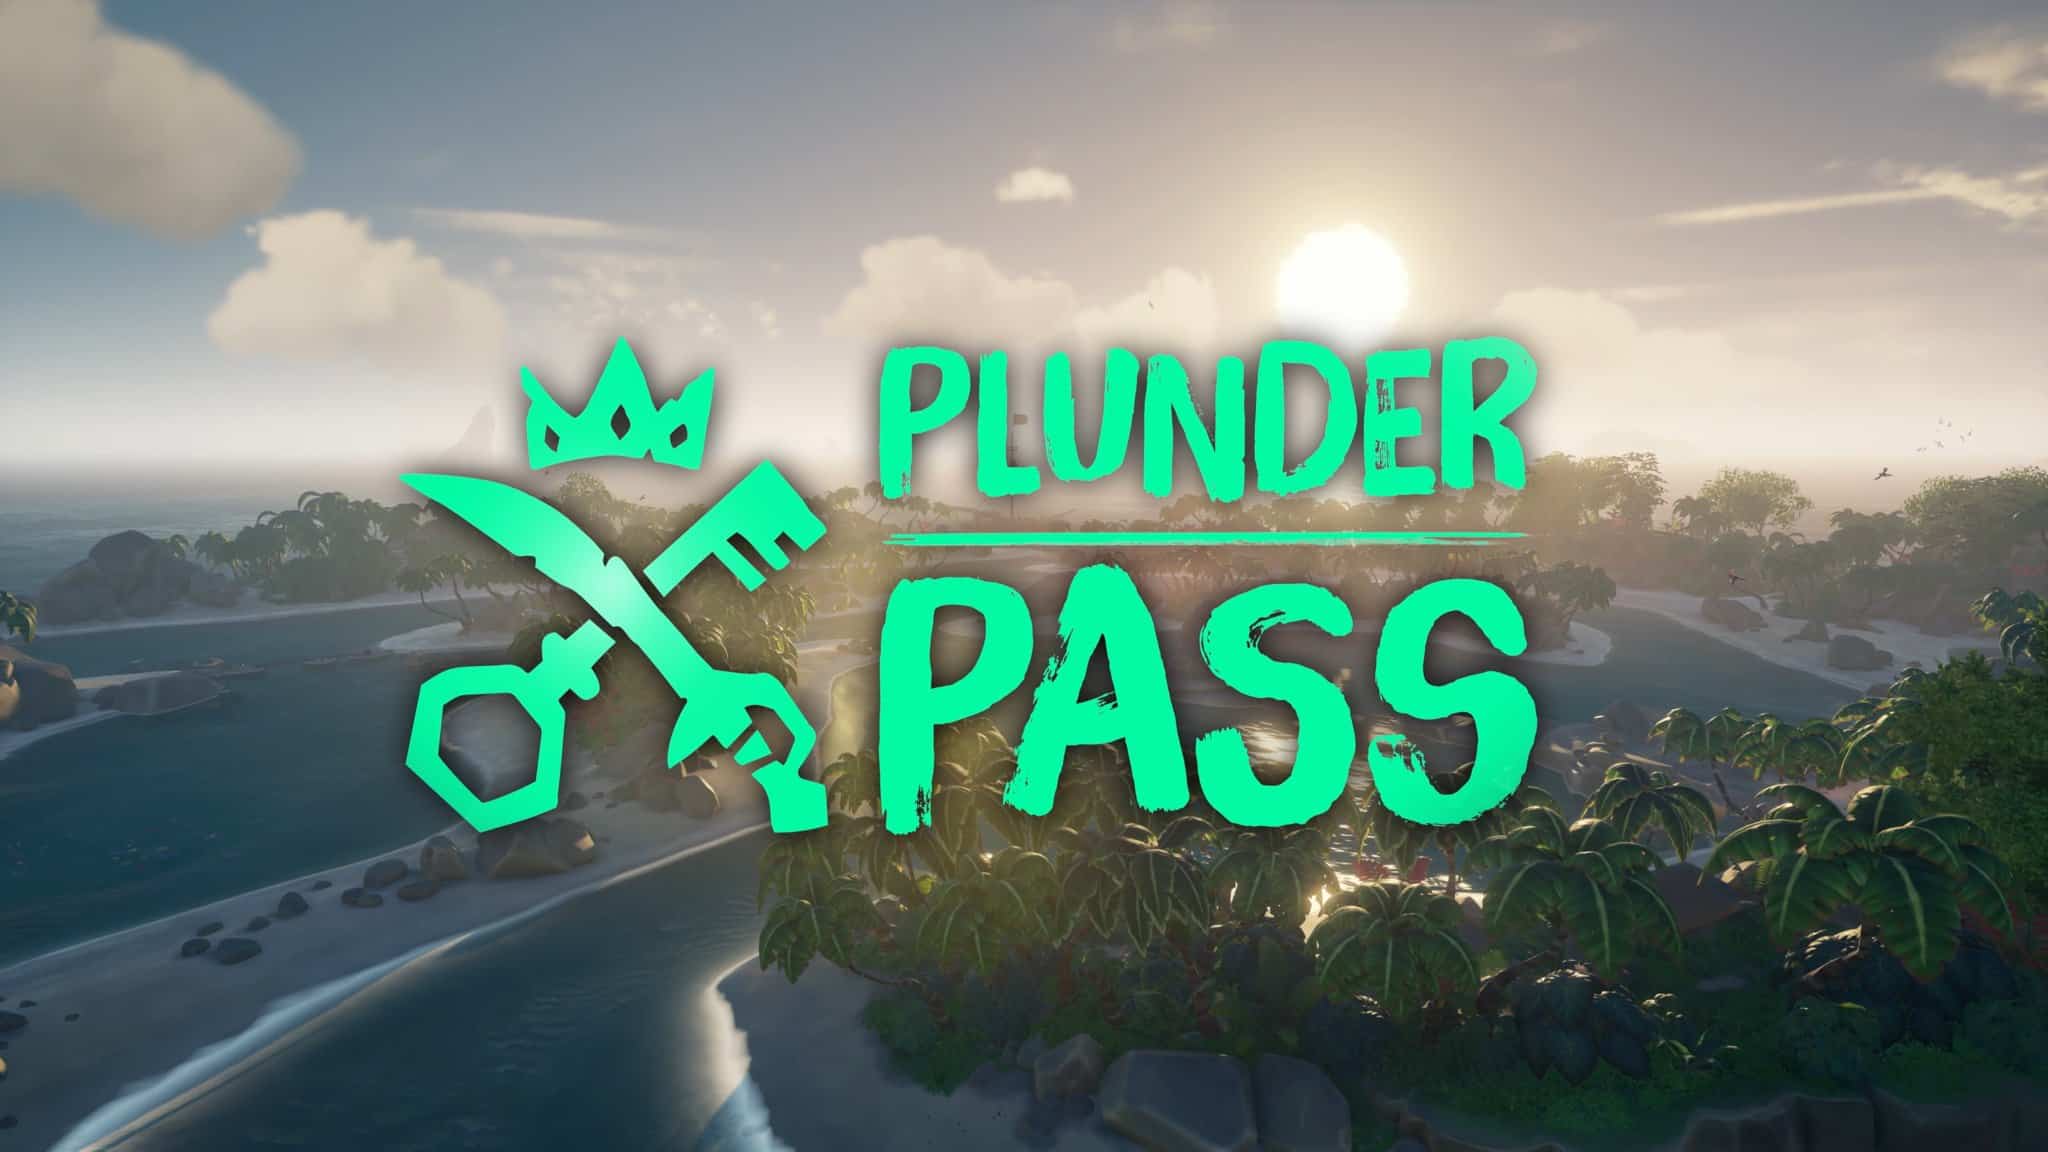 Plunder pass sea of thieves